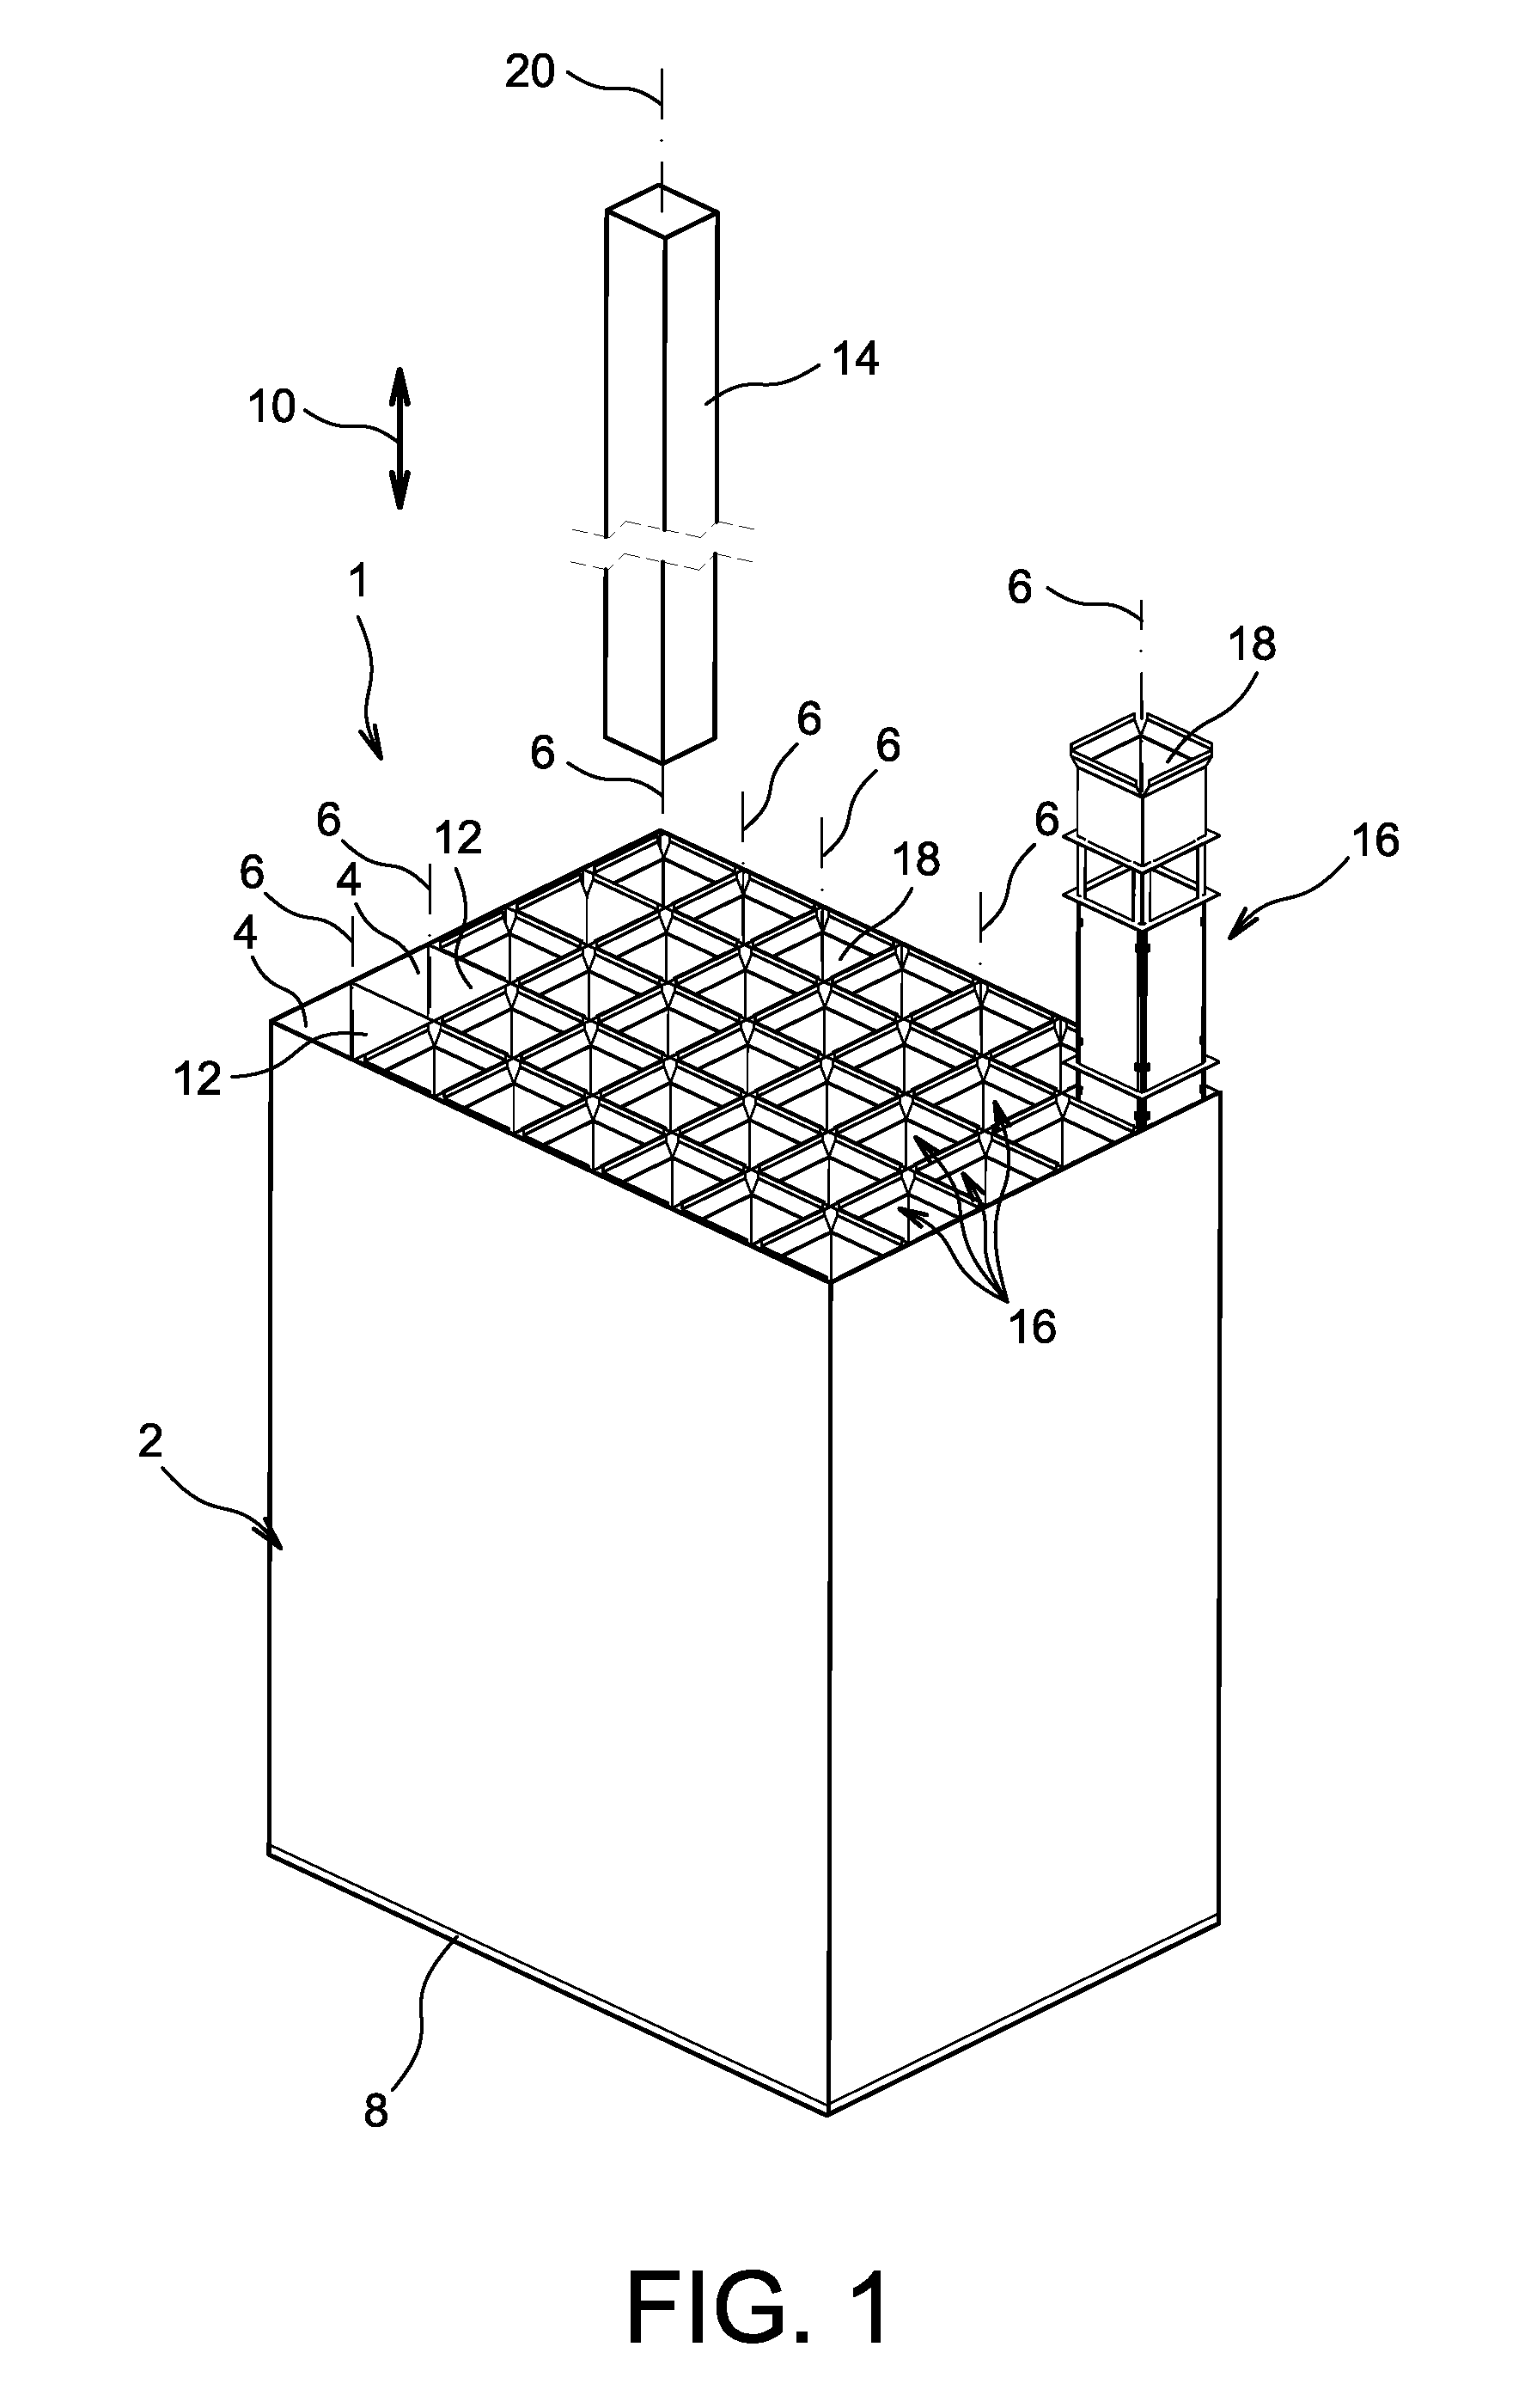 Storage rack for fresh or spent nuclear fuel assemblies